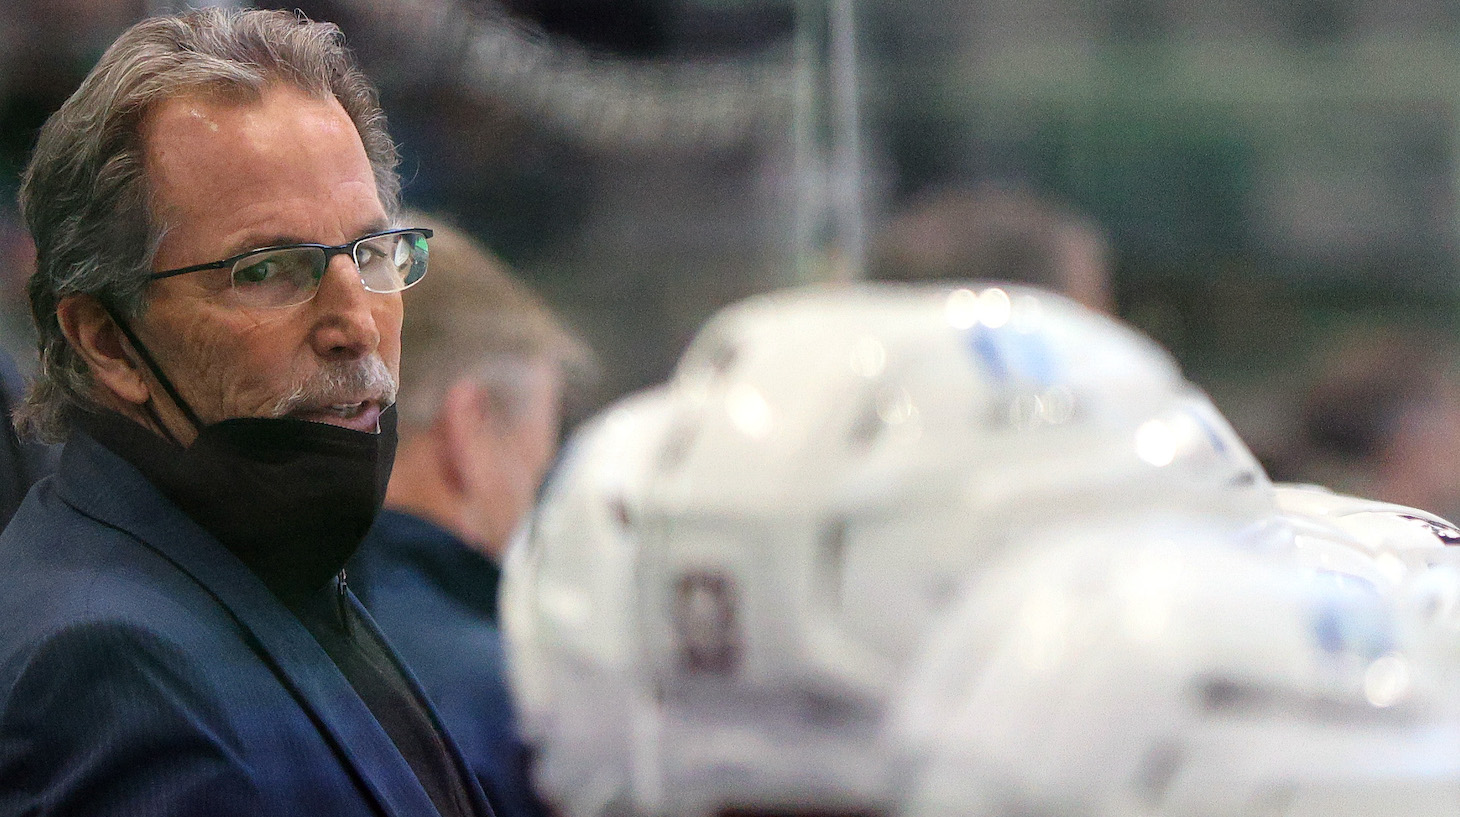 DALLAS, TEXAS - MARCH 04: John Tortorella, head coach of the Columbus Blue Jackets in the third period at American Airlines Center on March 04, 2021 in Dallas, Texas. (Photo by Ronald Martinez/Getty Images)